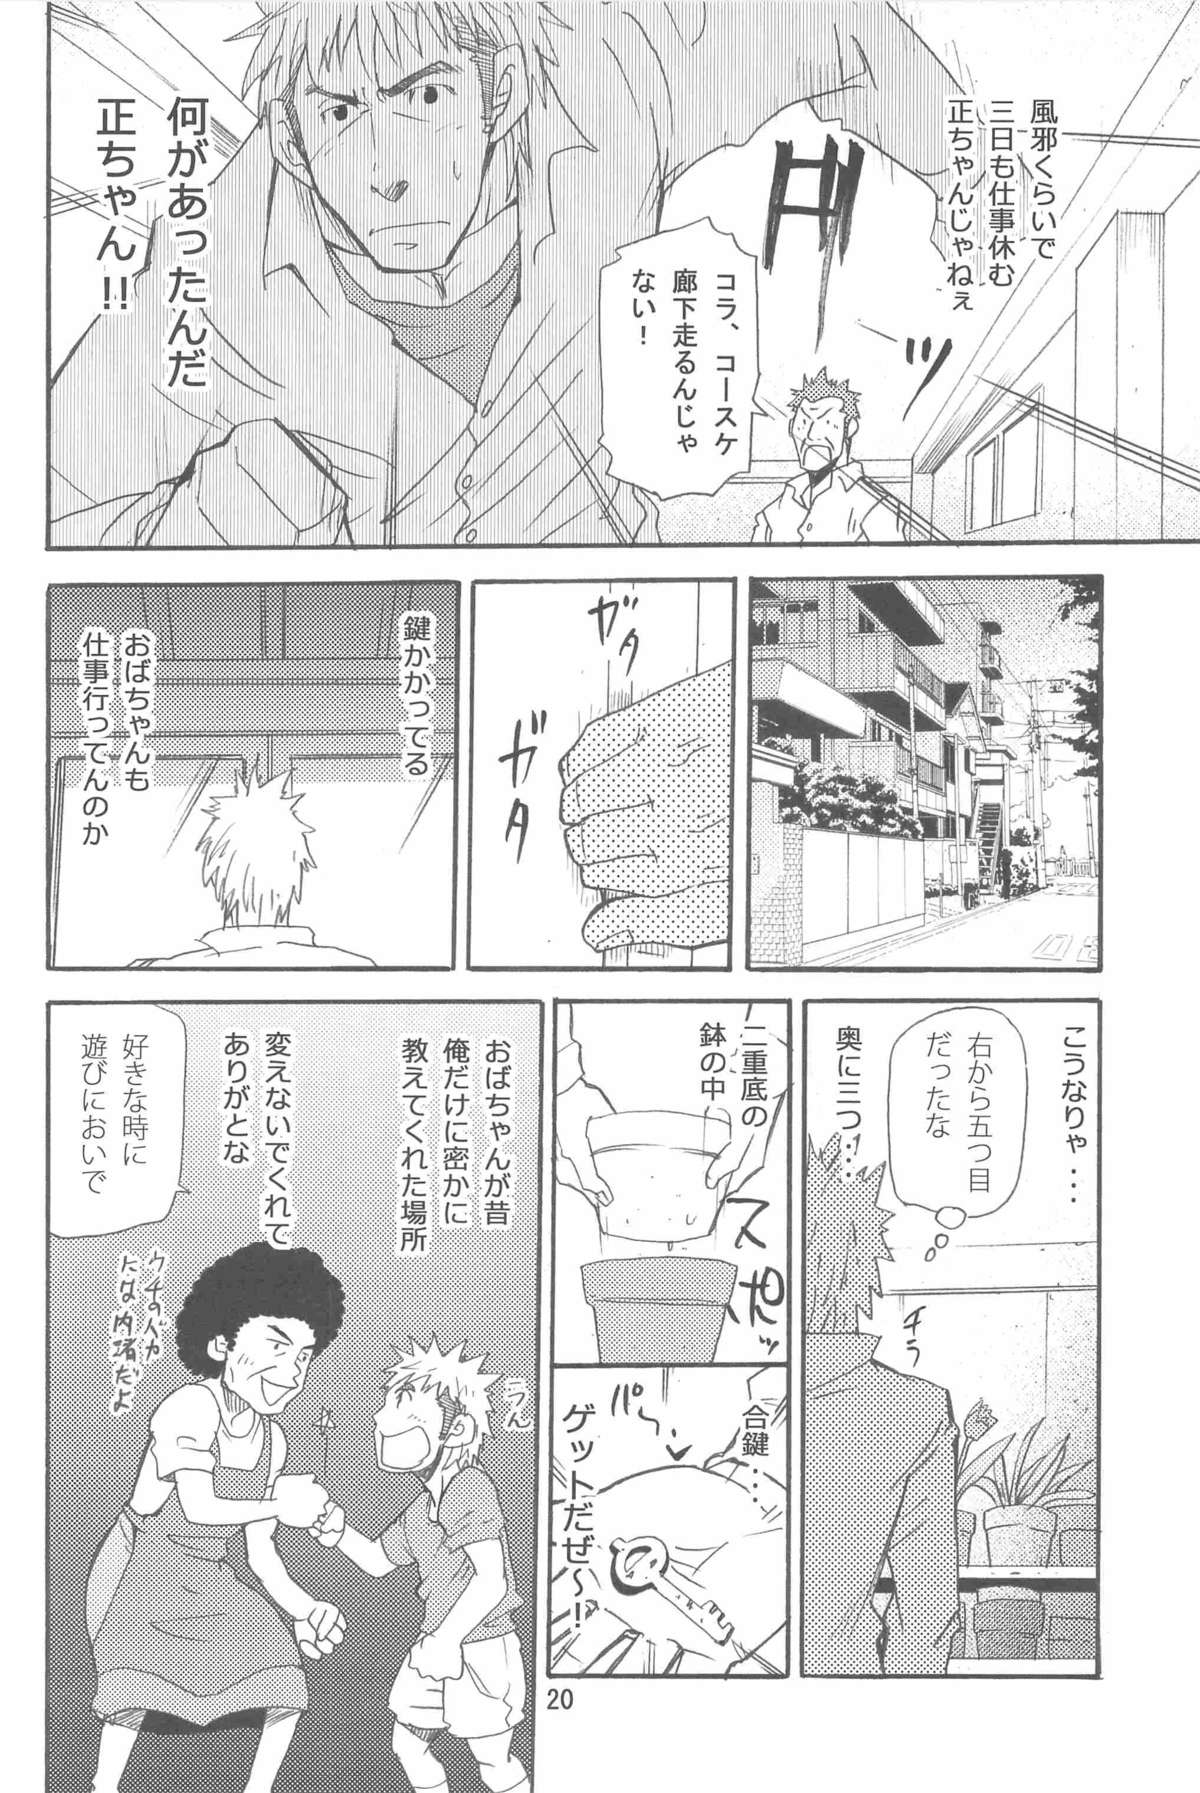 [MATSU Takeshi] More and More of You 5 page 2 full